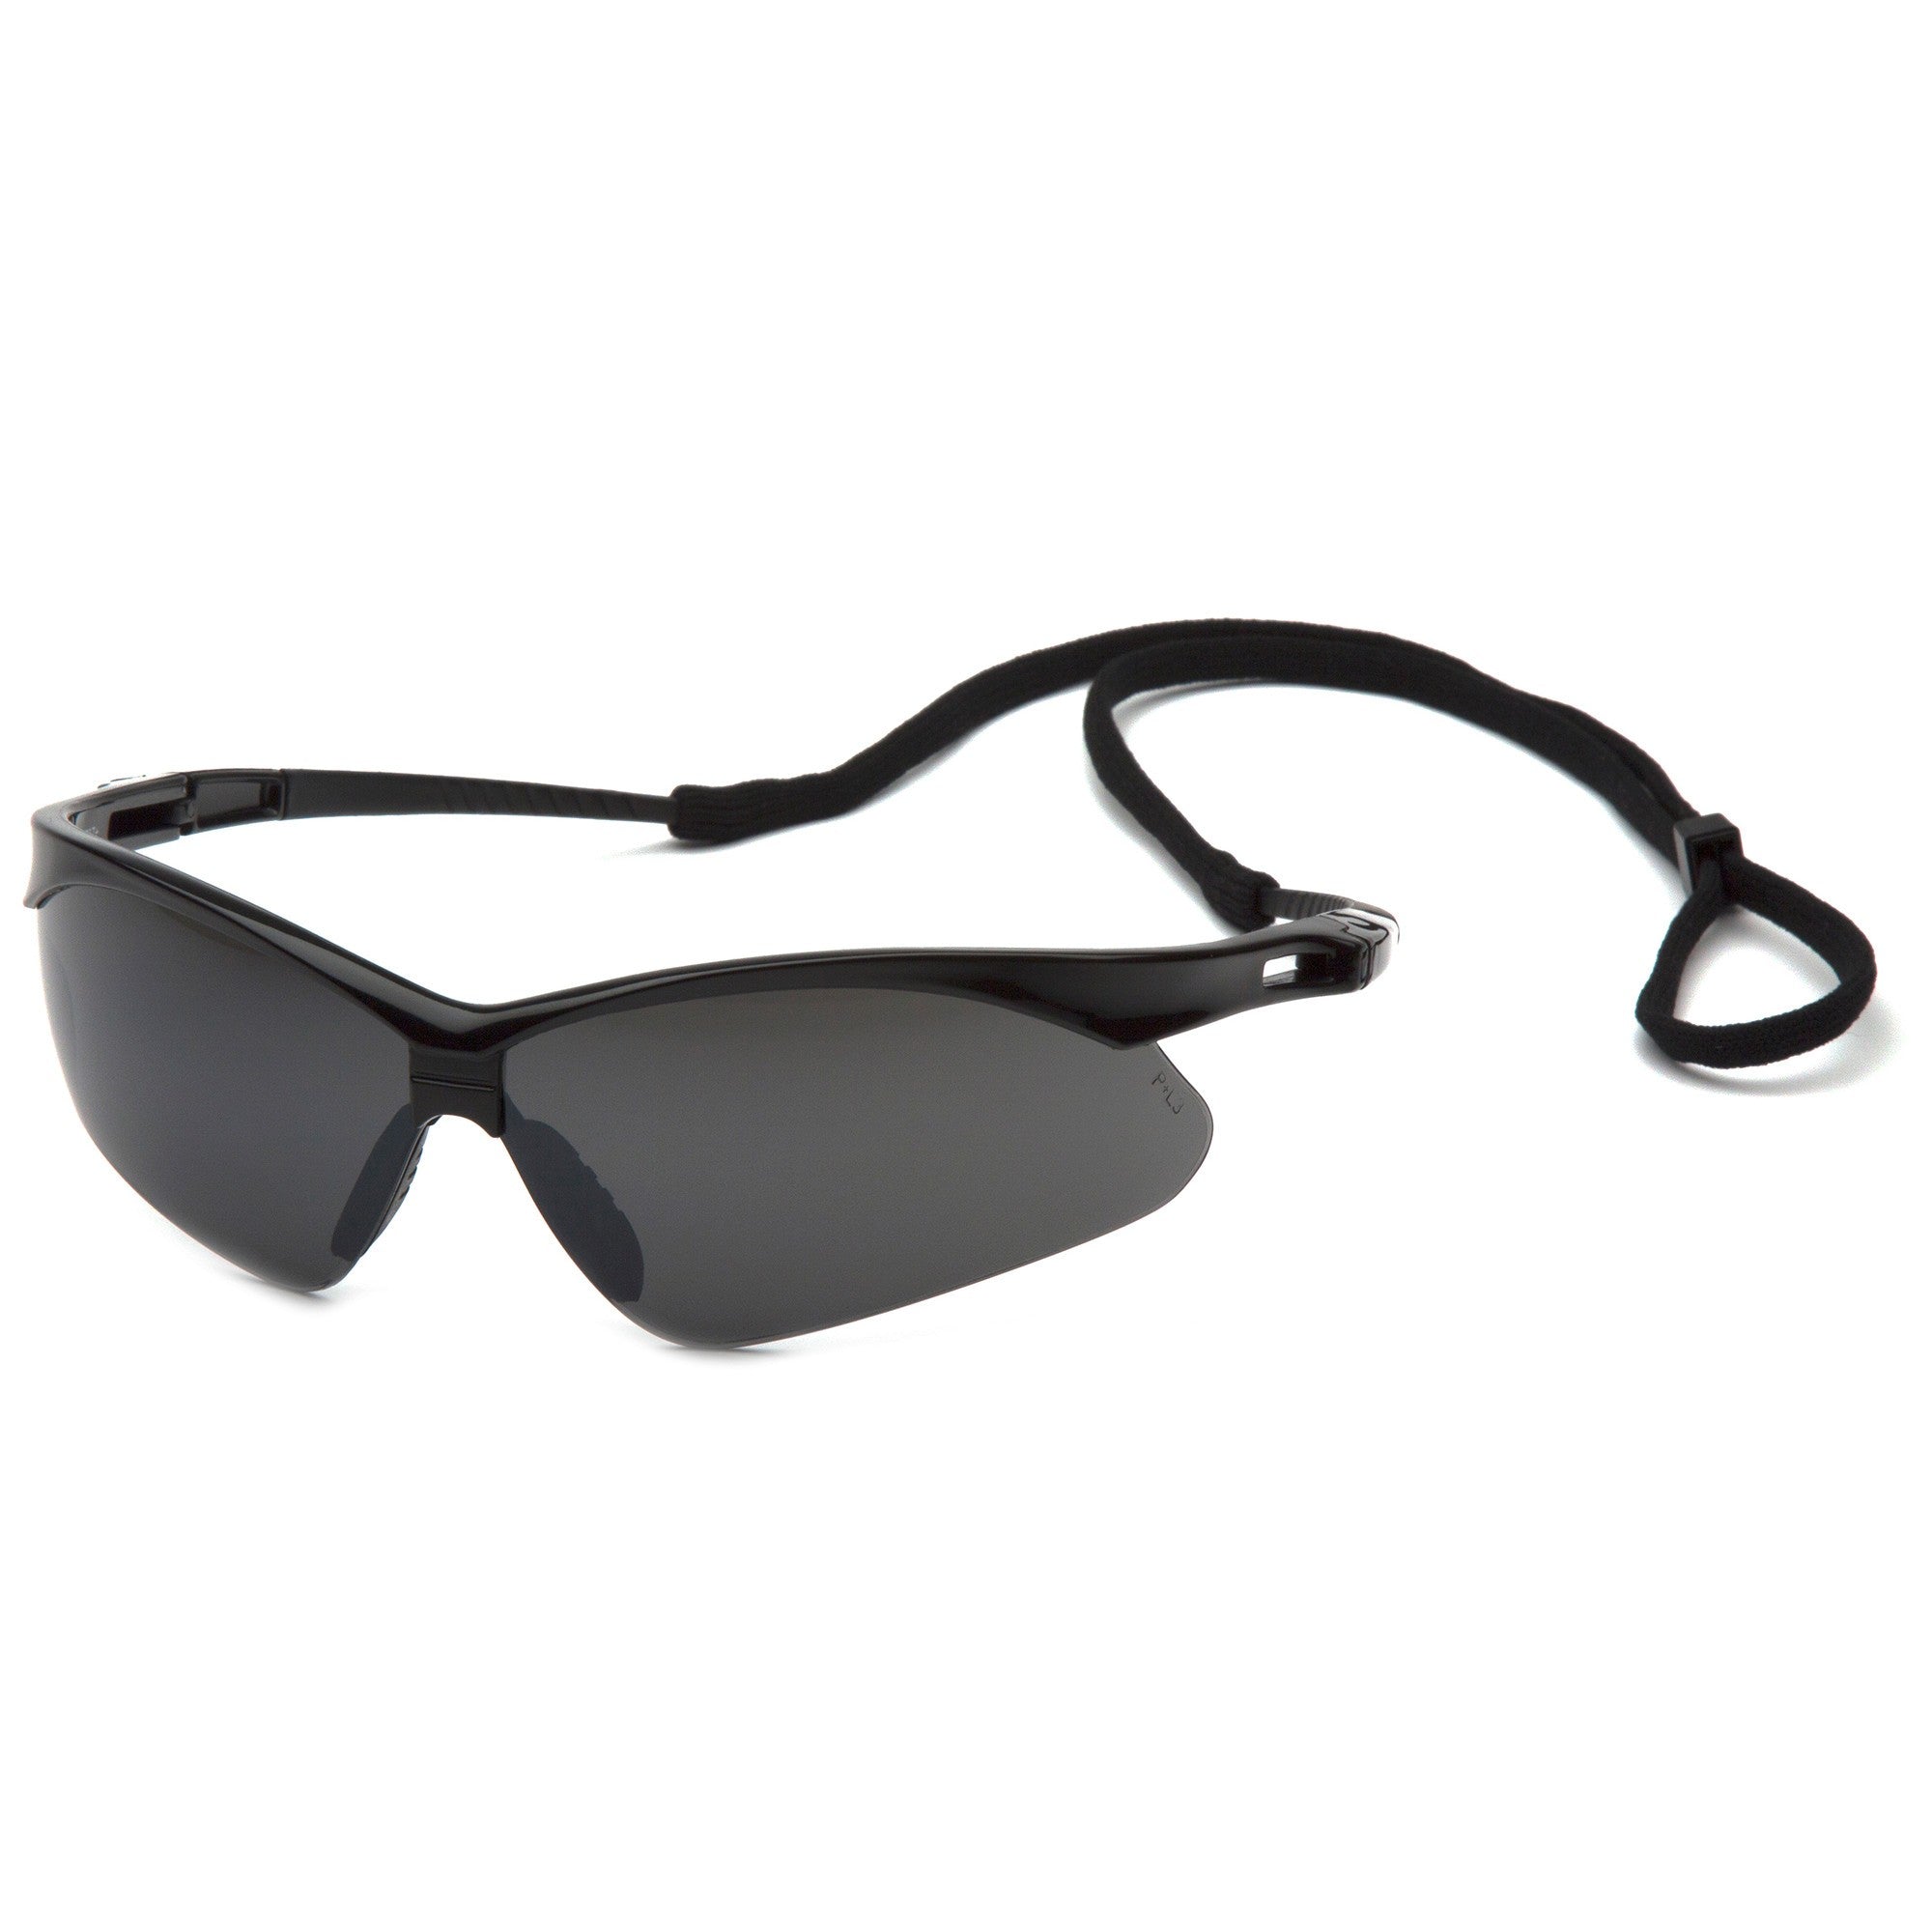 Pyramex PMXTREME Safety Glasses with Cord